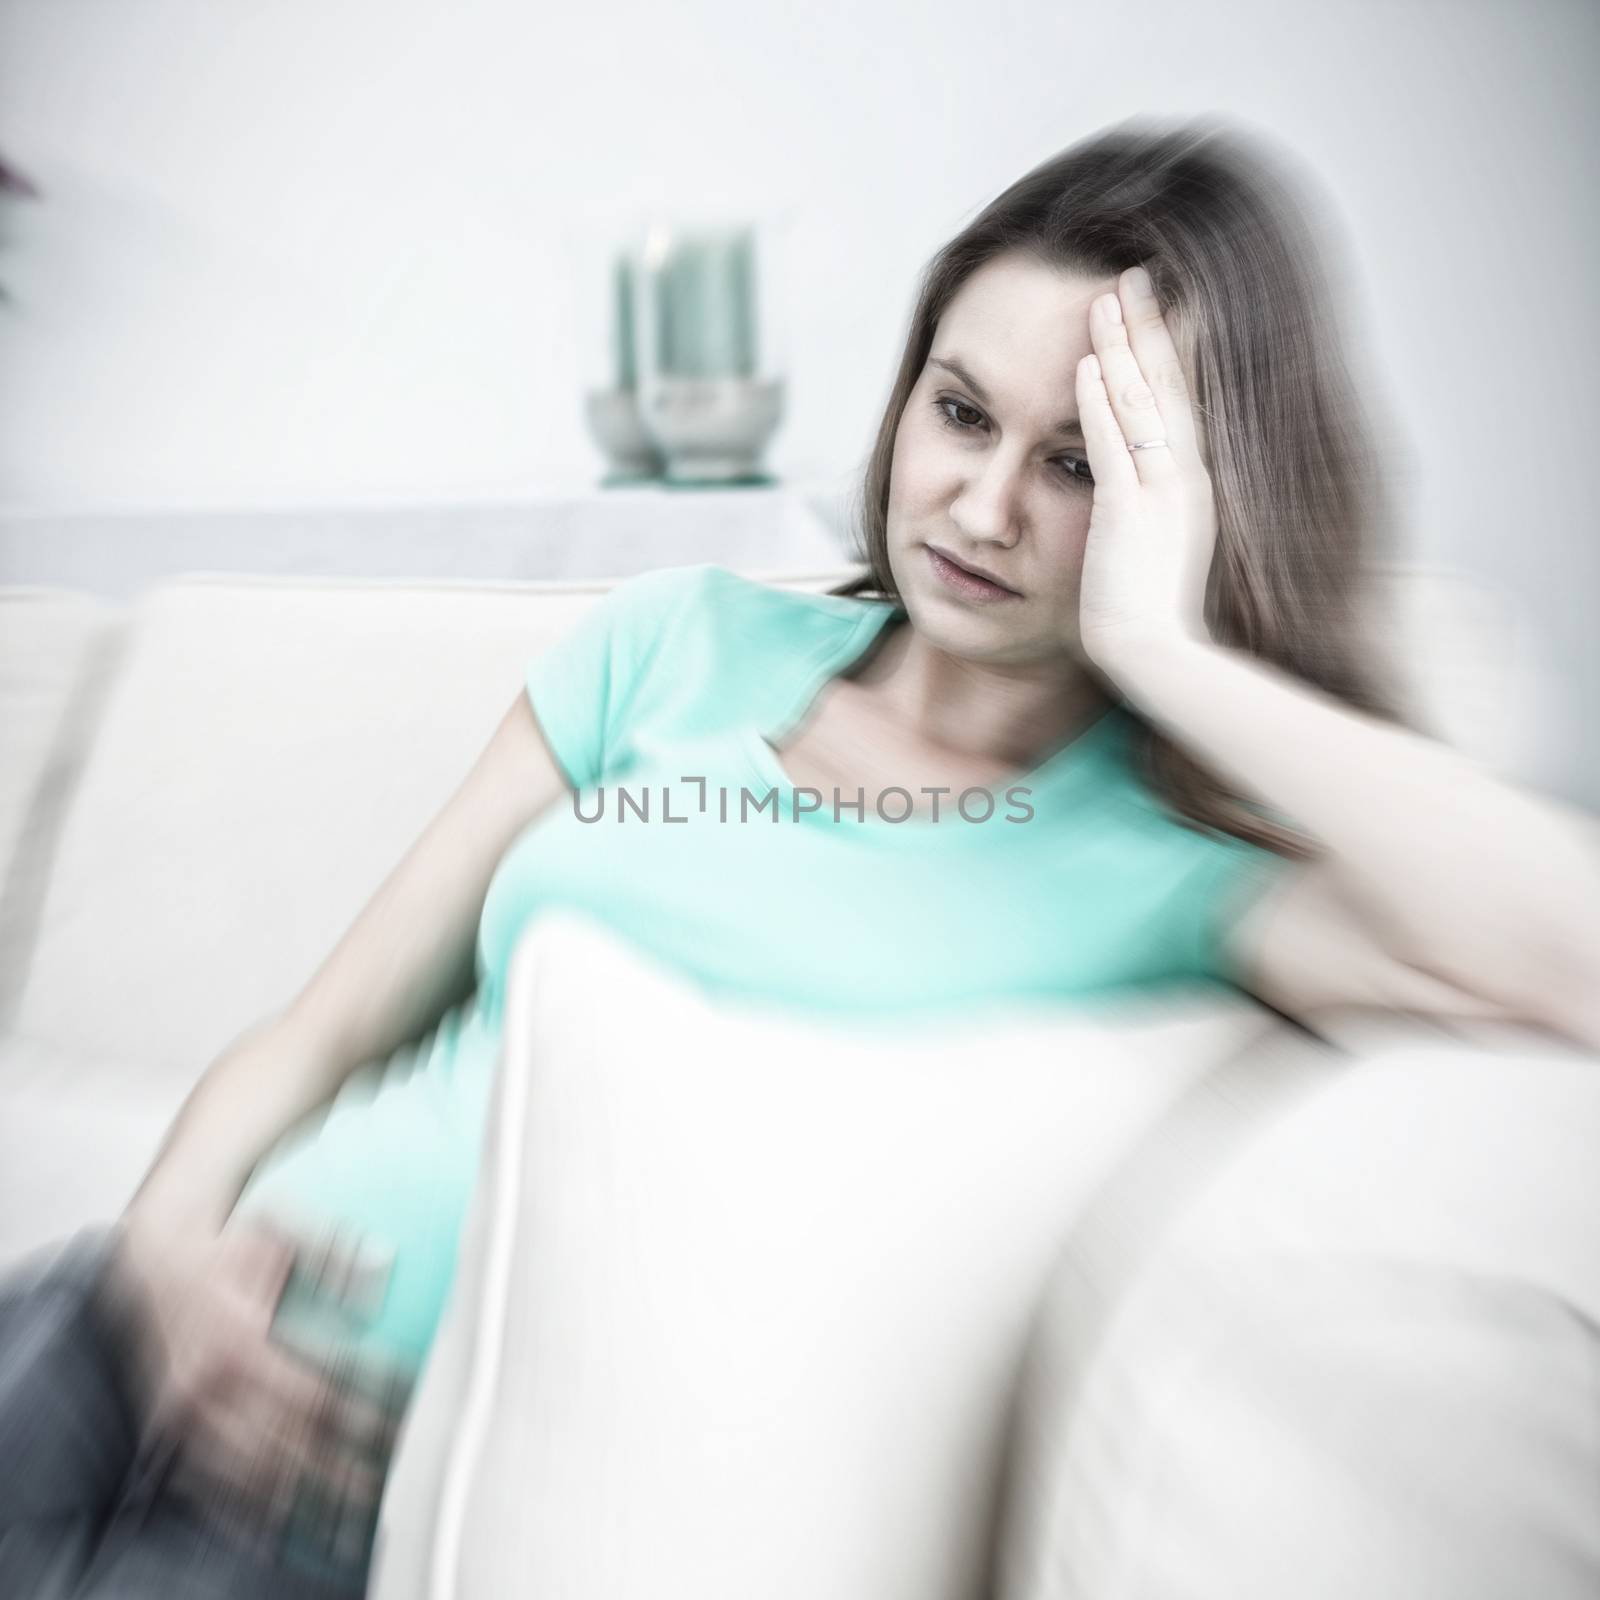 White background with vignette against pregnant woman with headache